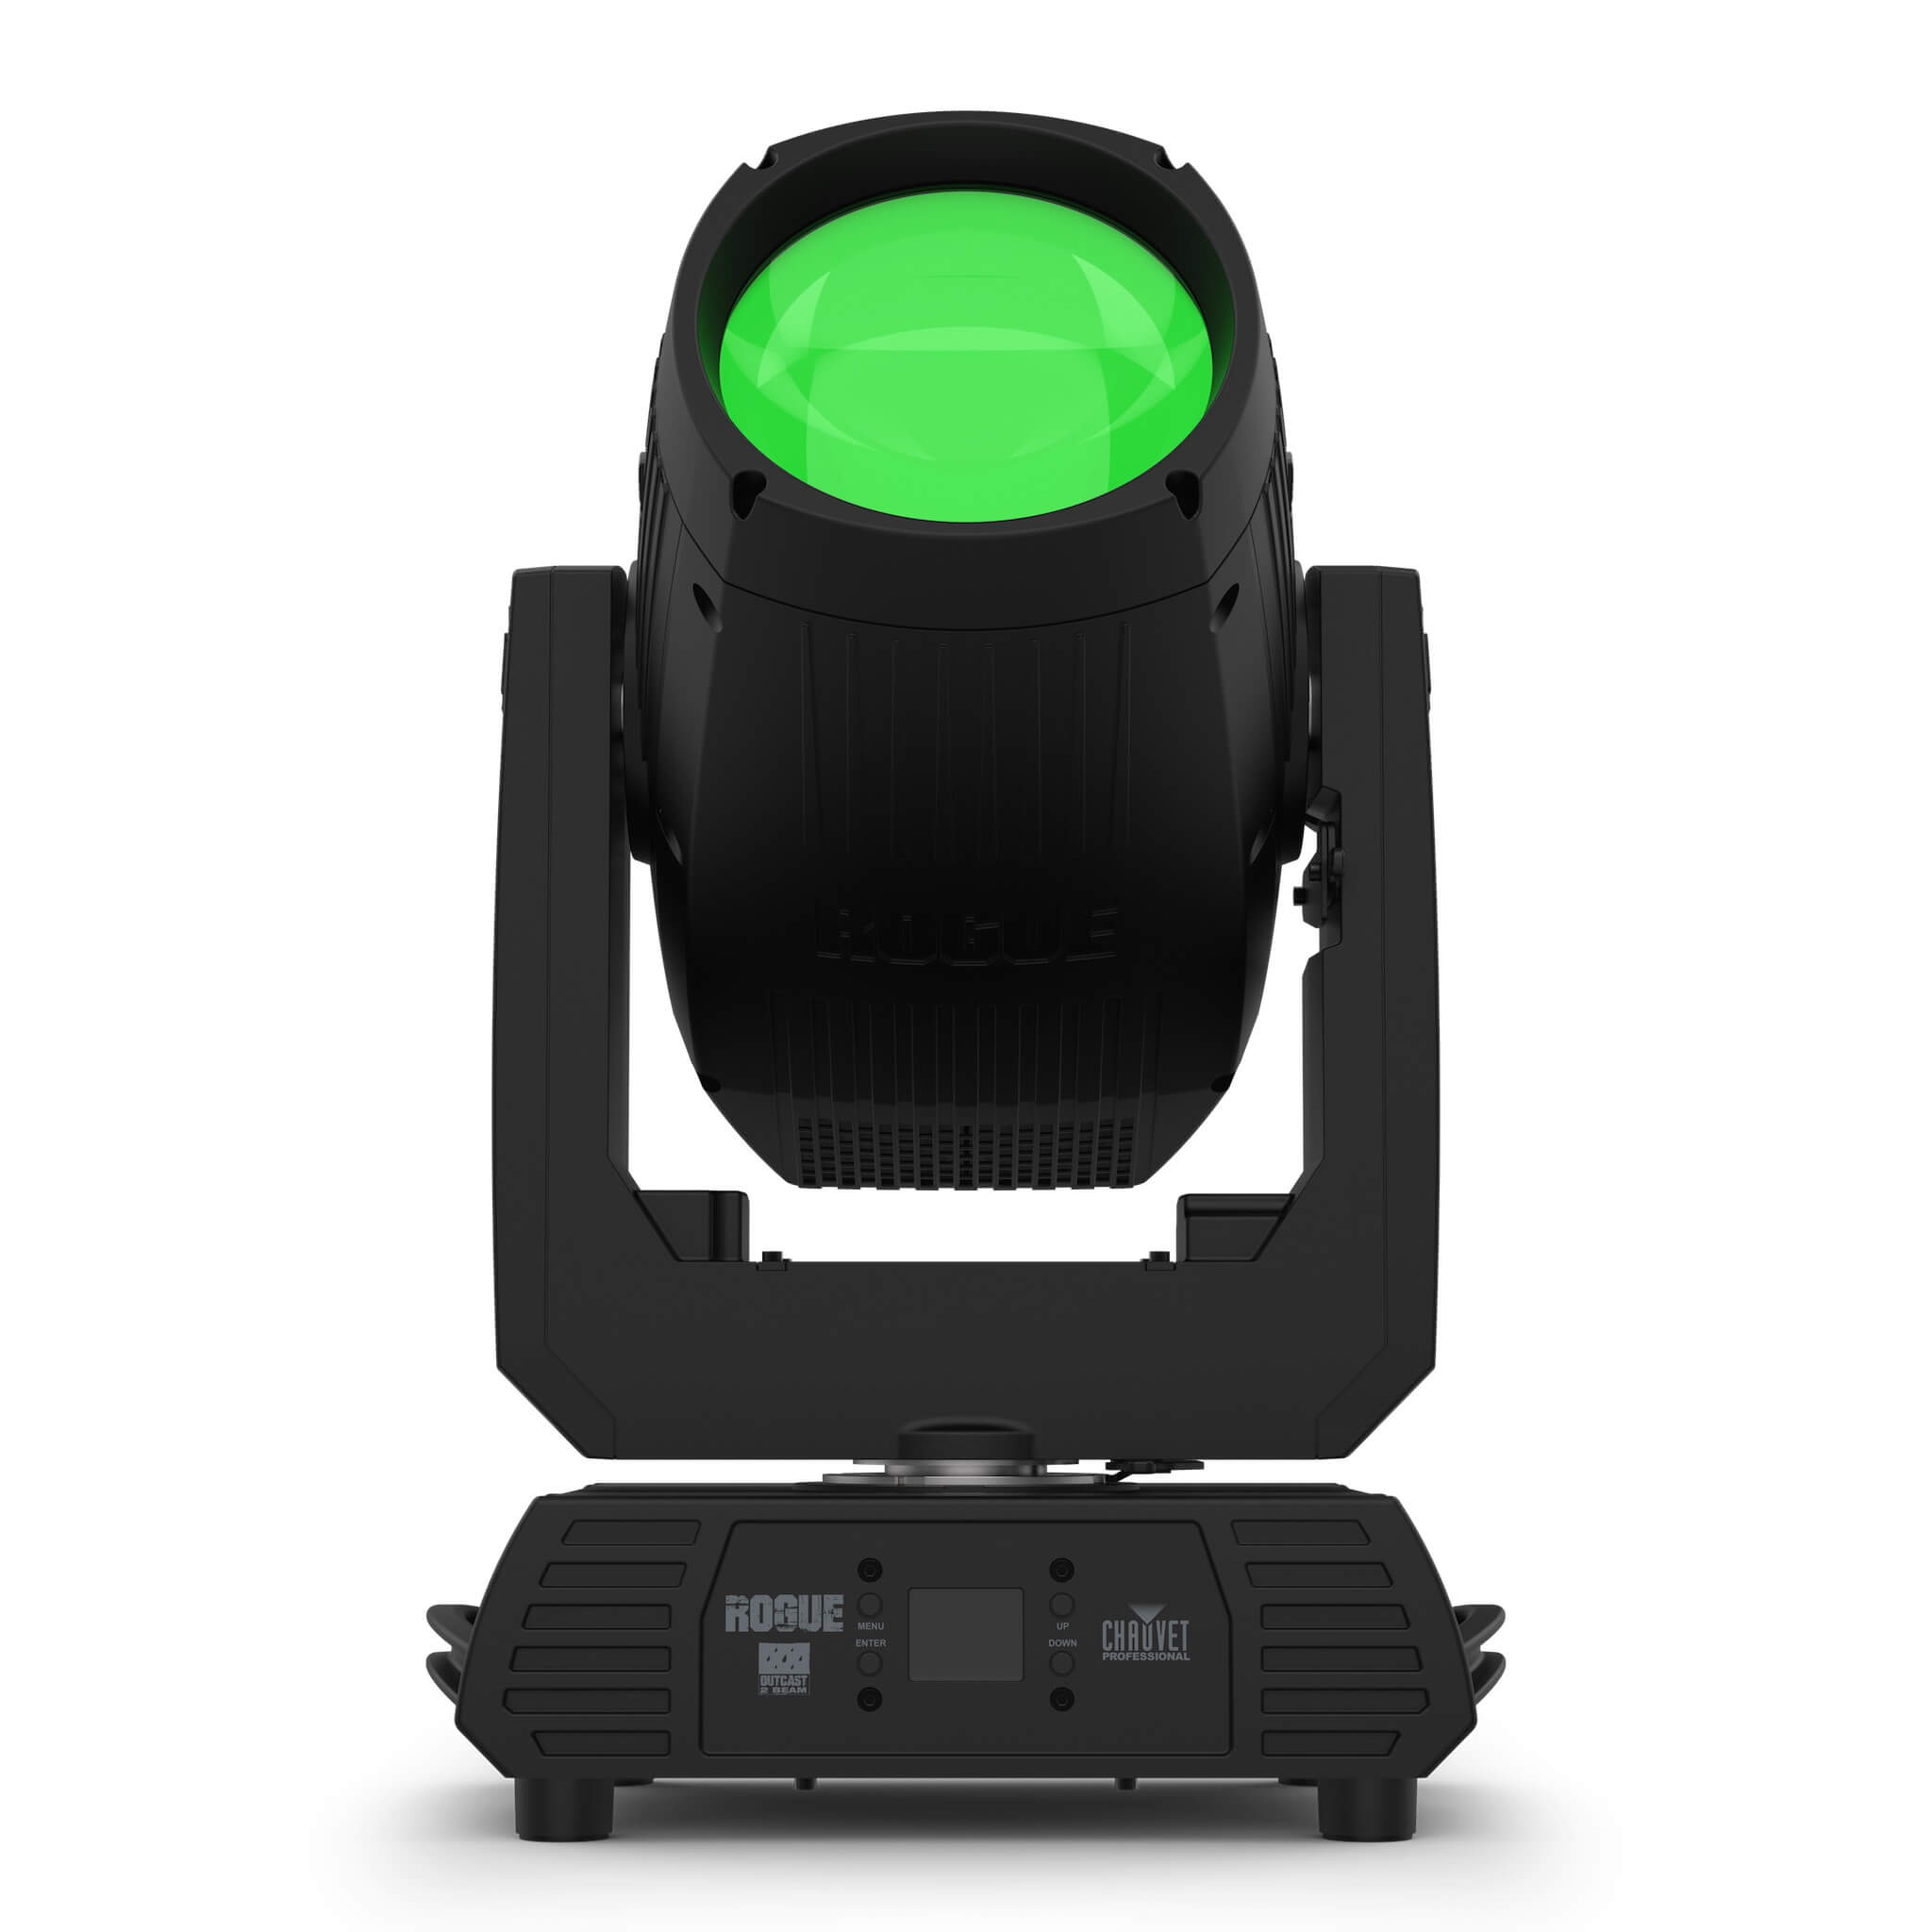 Chauvet Professional Rogue Outcast 2 Beam - LED Moving Head Light, front